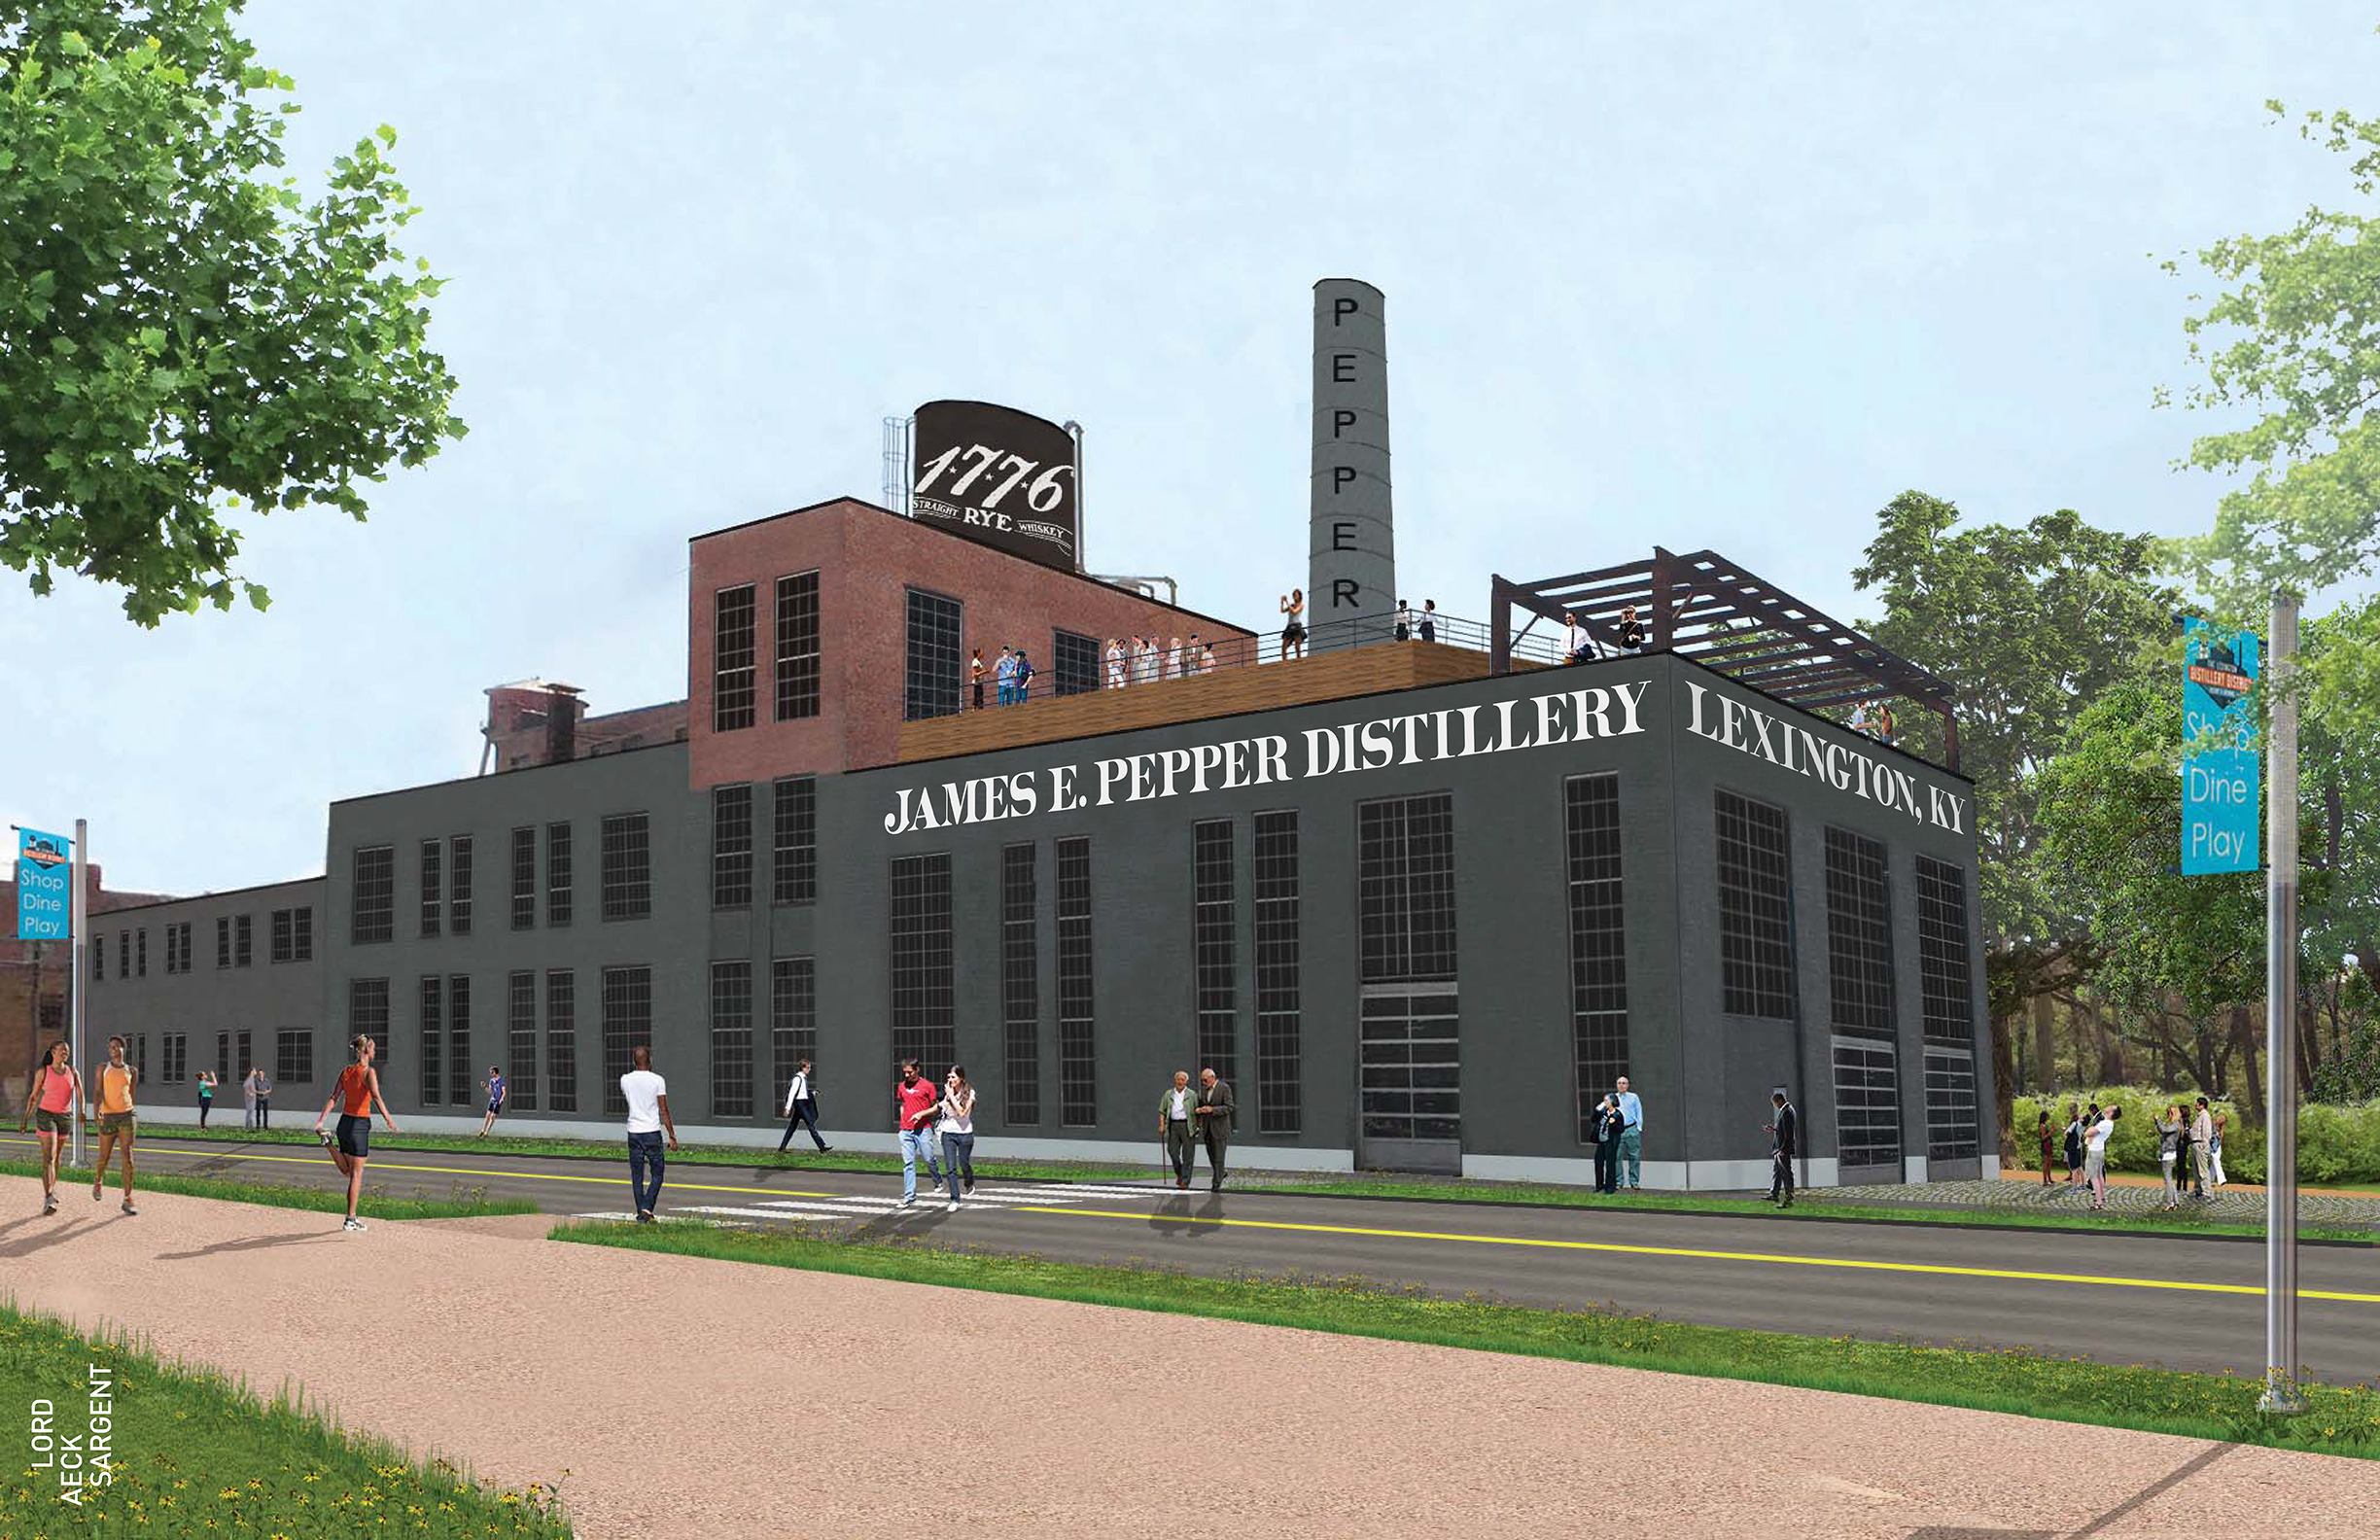 An architect's rendering of the James E. Pepper Distillery redevelopment project. Image courtesy Georgetown Trading Co.